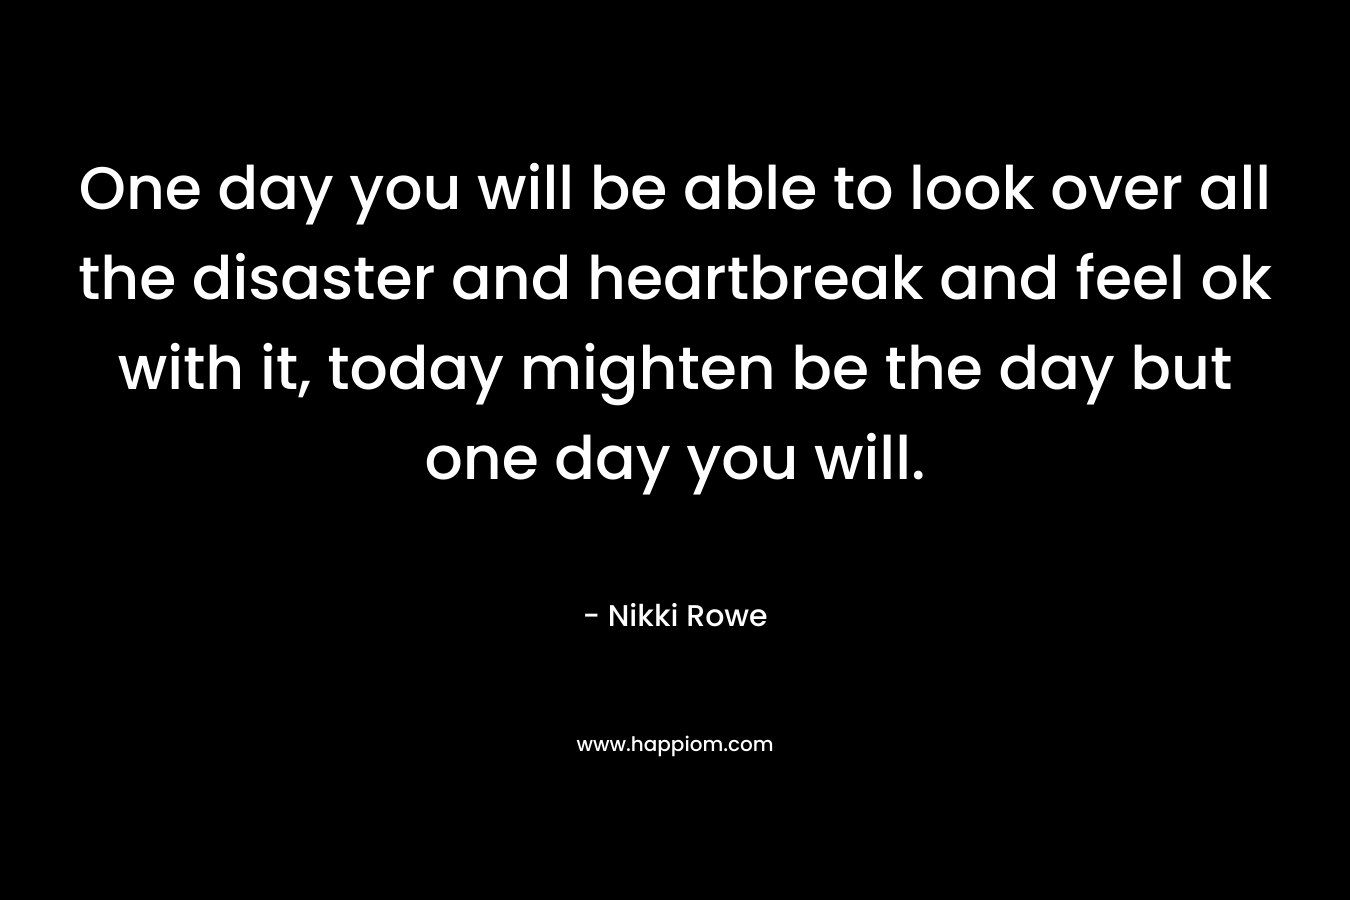 One day you will be able to look over all the disaster and heartbreak and feel ok with it, today mighten be the day but one day you will. – Nikki Rowe